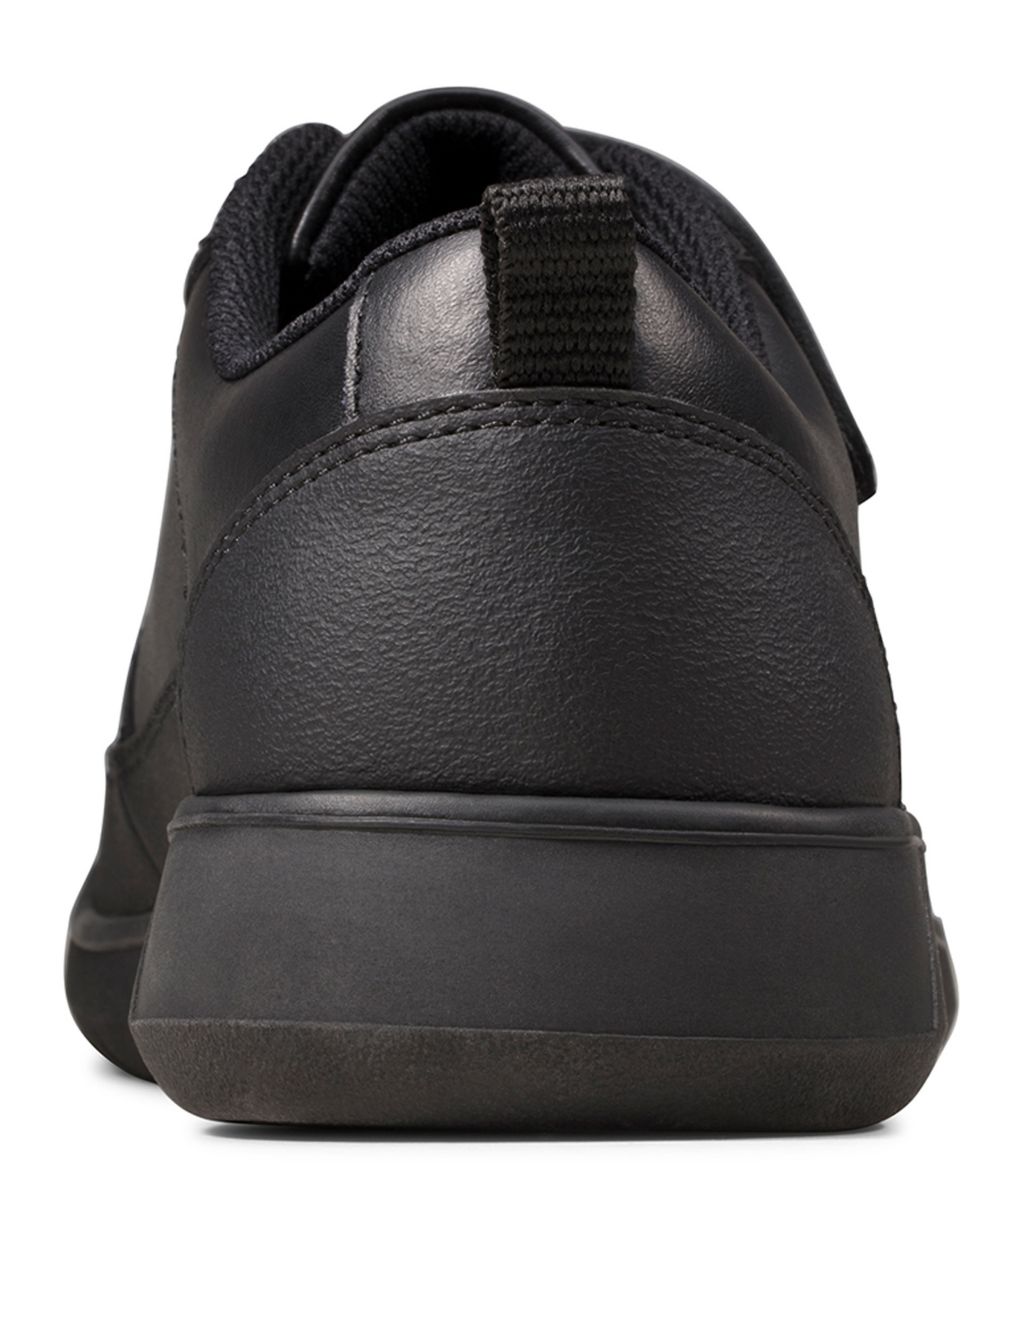 Kids' Leather Riptape School Shoes (Youth size 3-9) image 2